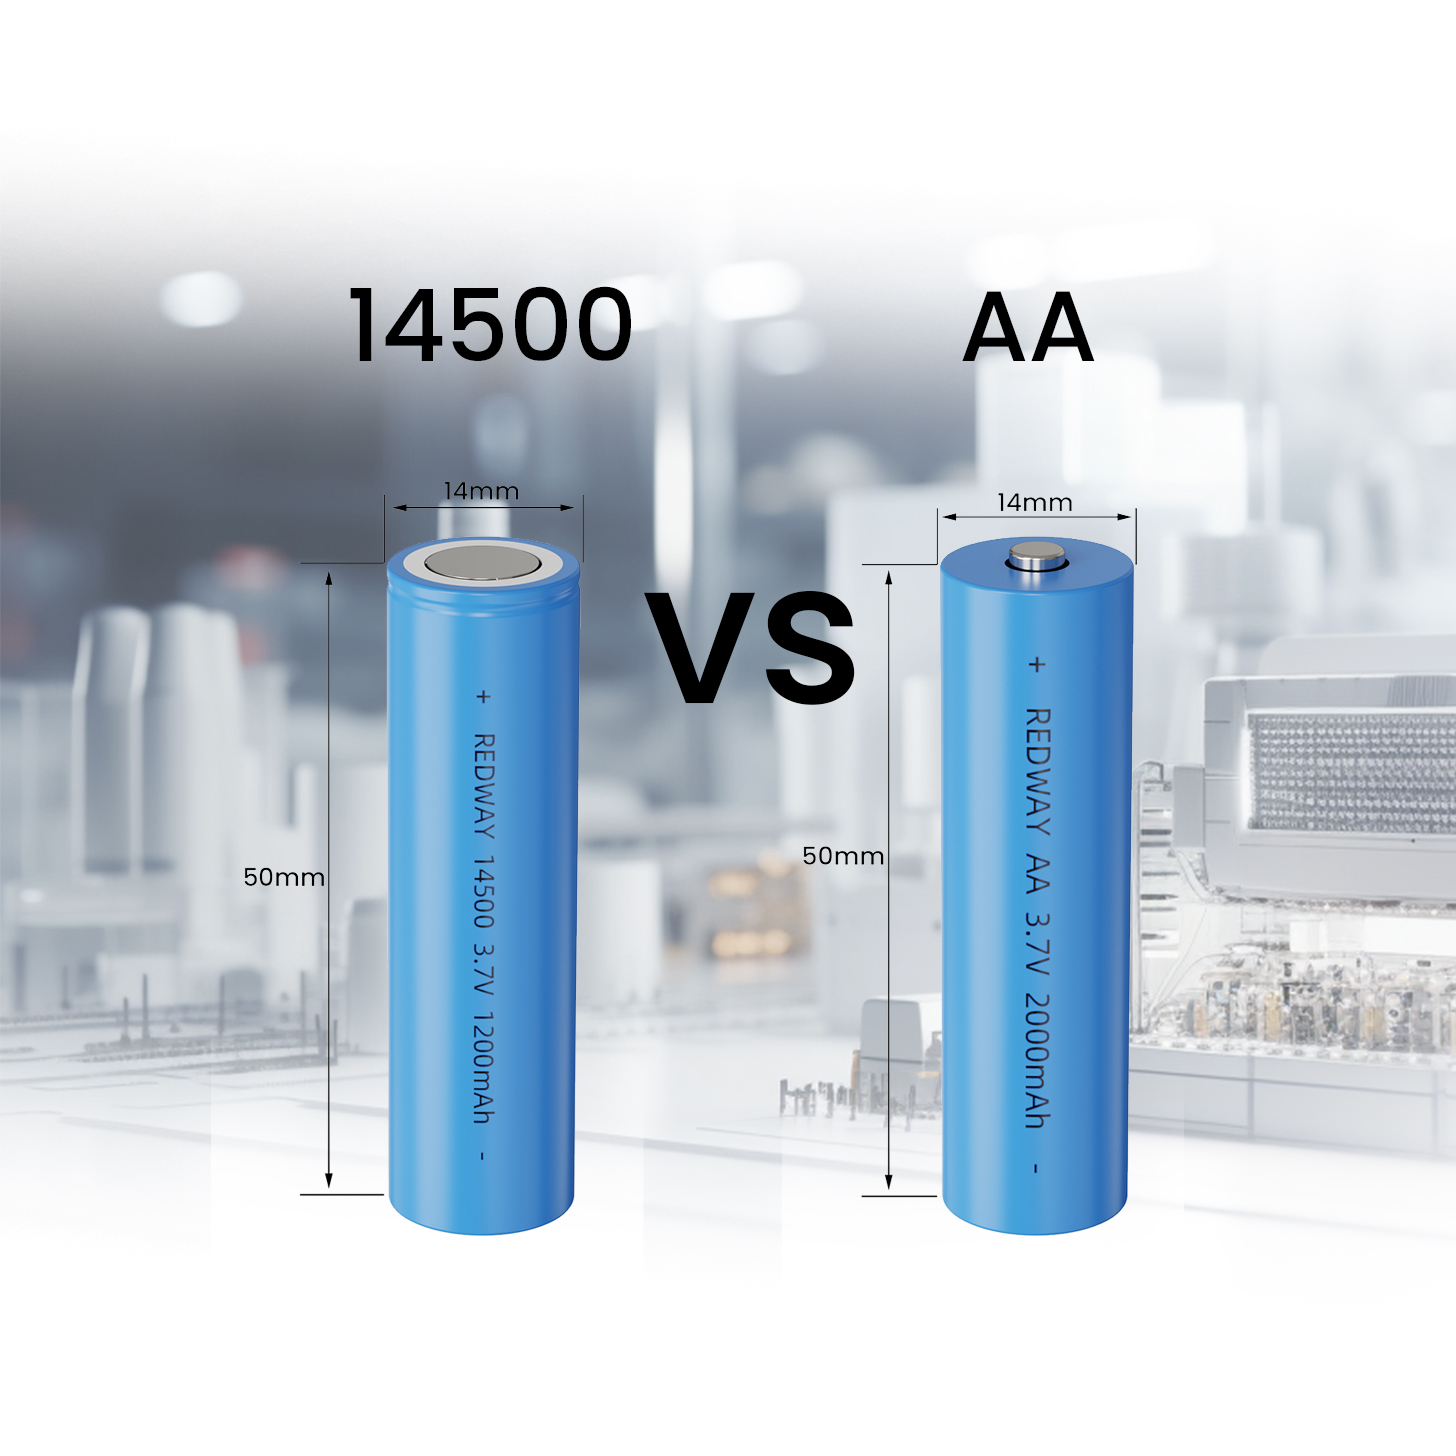 14500 vs AA Battery, Can I use 14500 instead of AA?